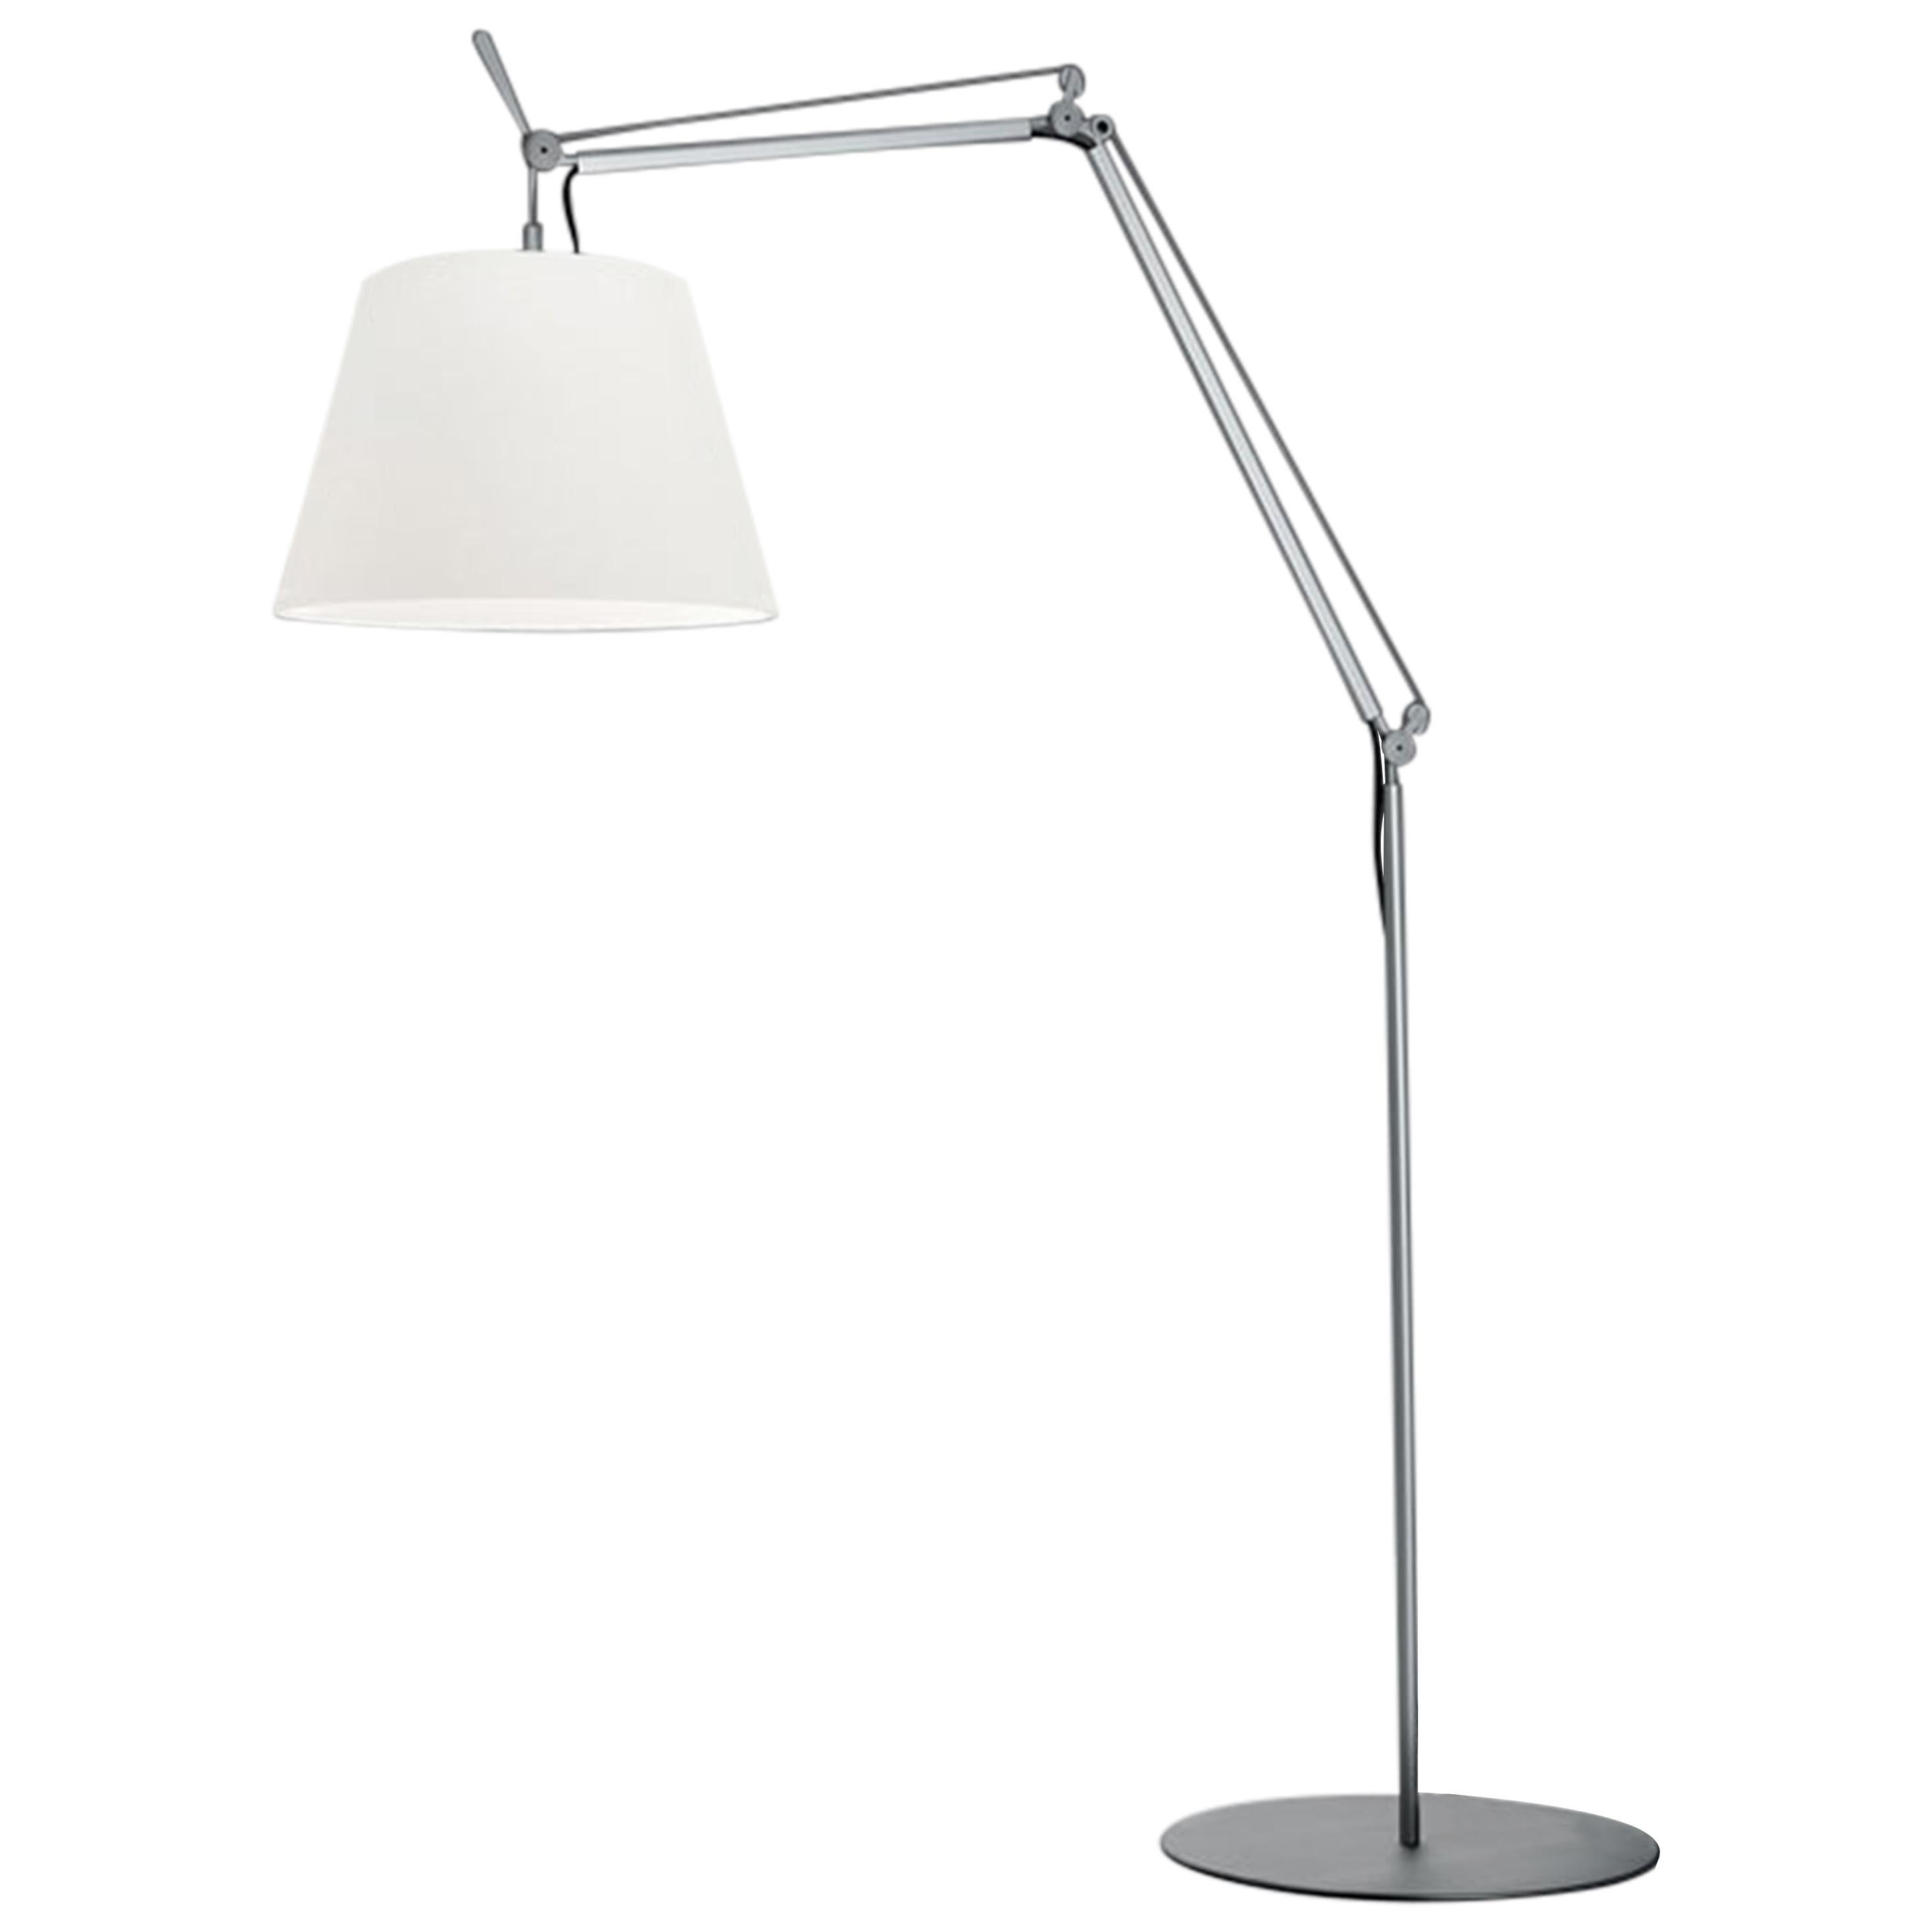 Artemide Tolomeo Mega Outdoor Floor Lamp in White by De Lucchi, Fassina For Sale